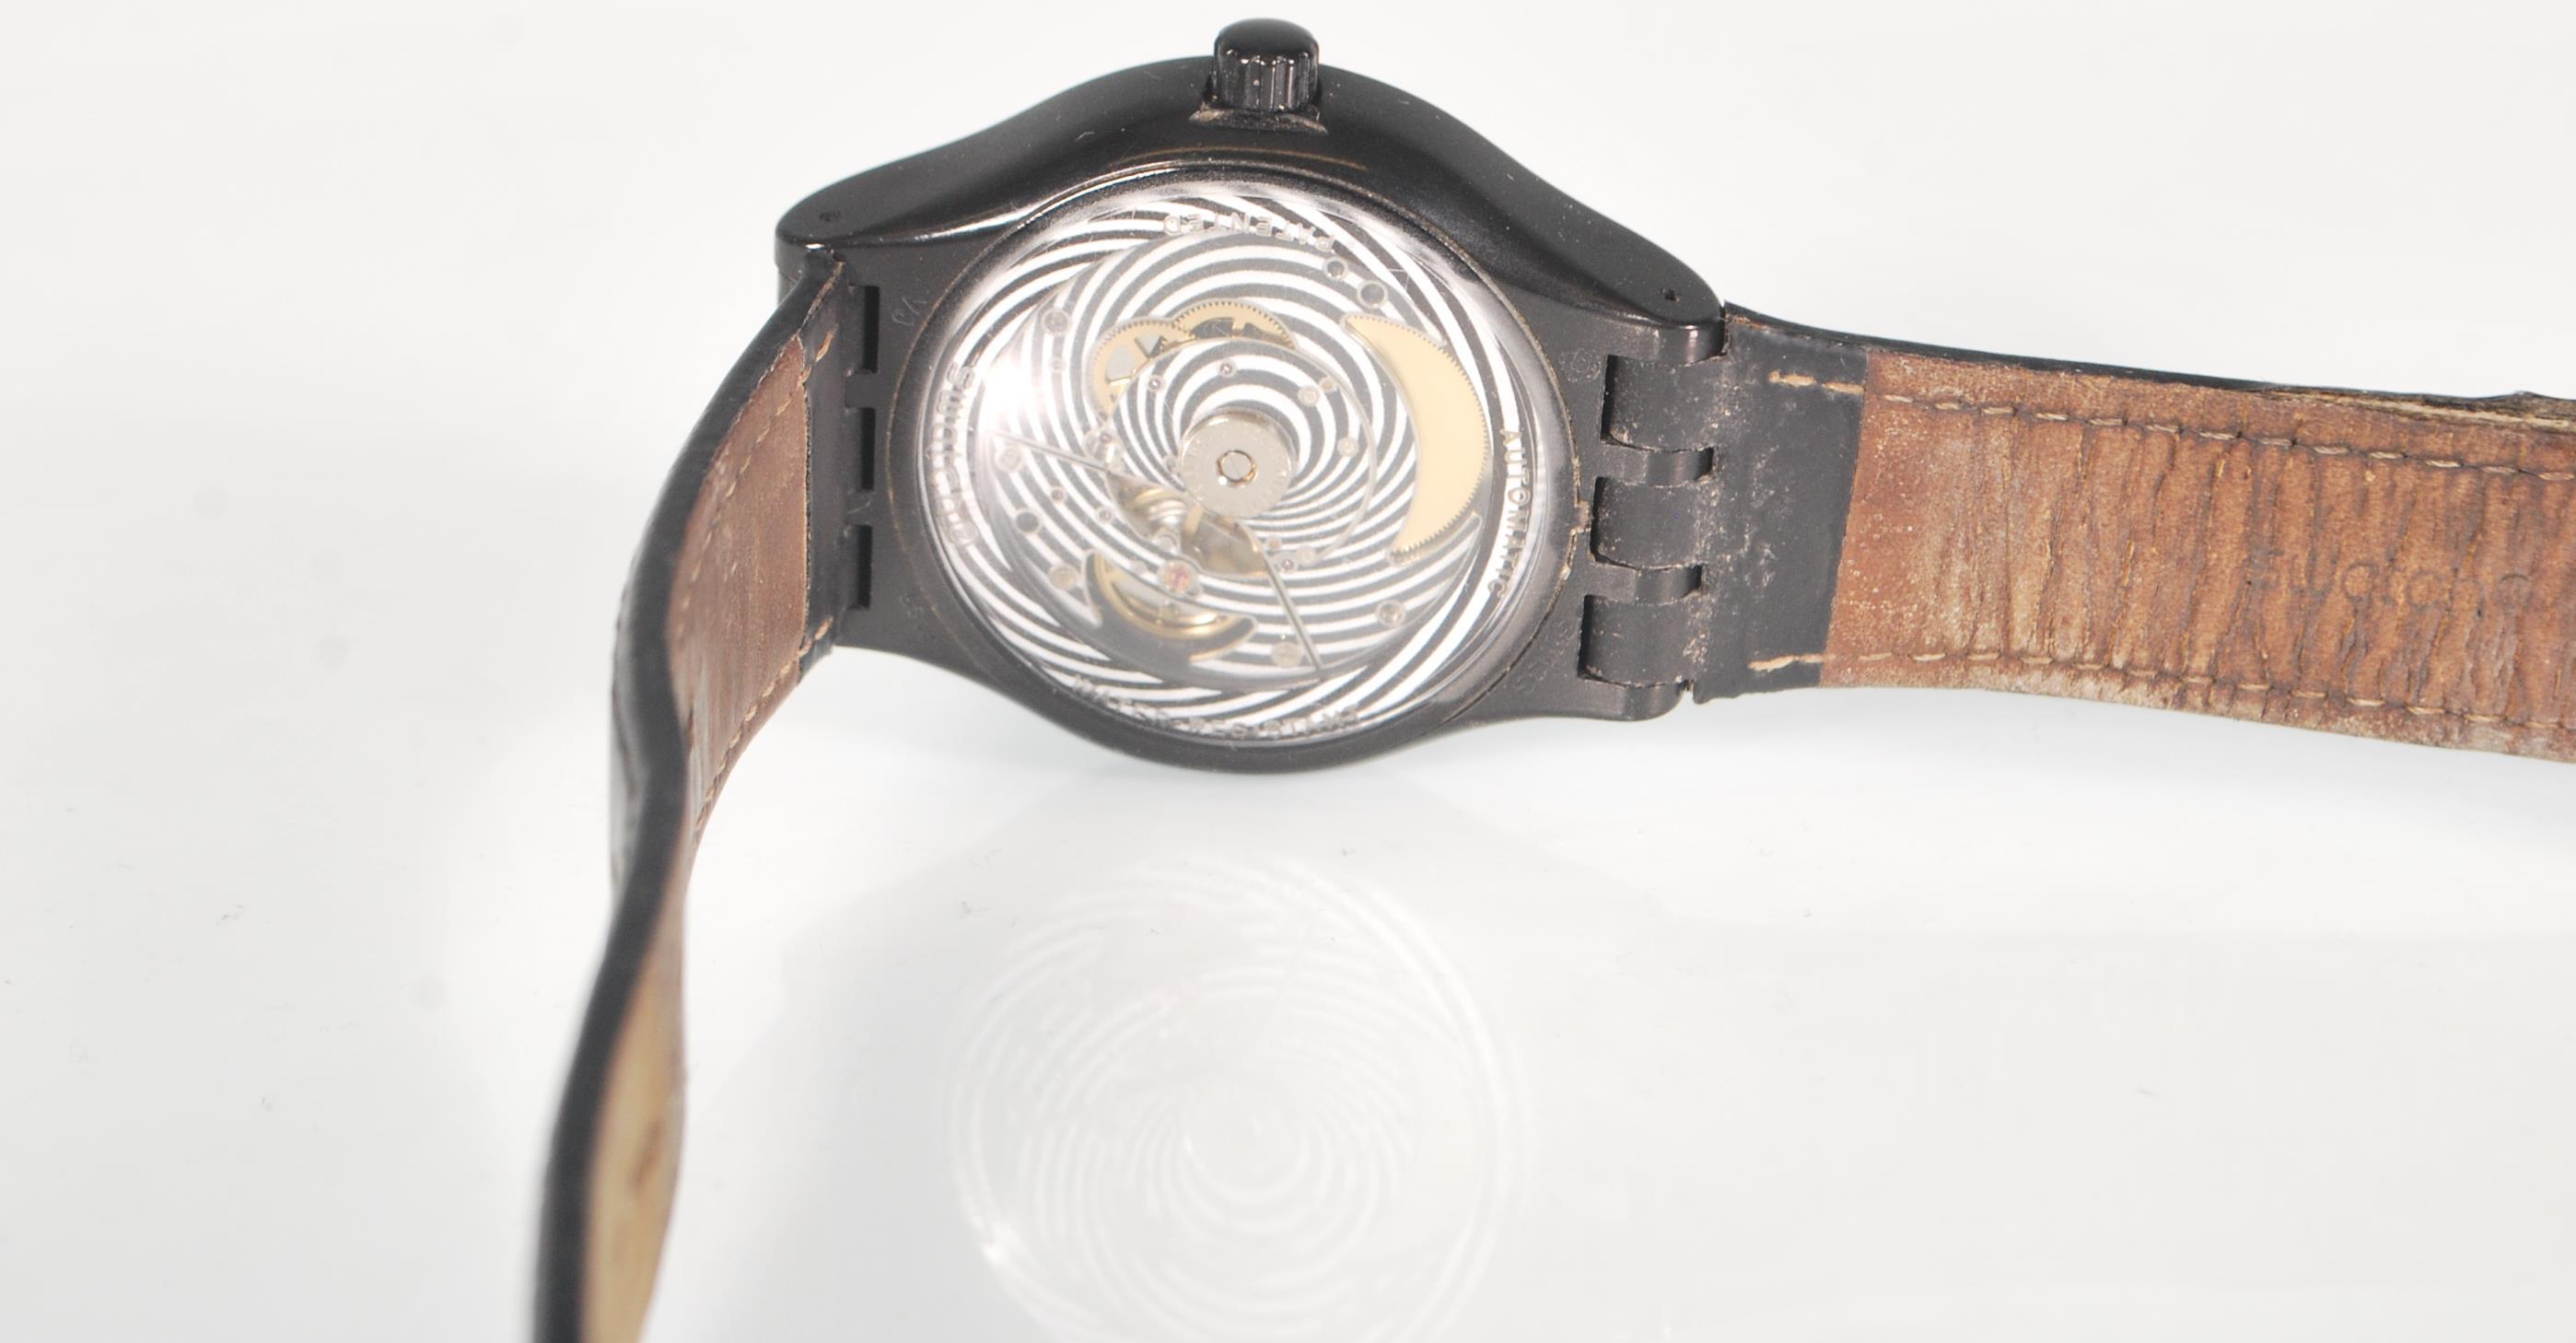 A Swatch Swiss Automatic wrist watch having a black face with a satellite design dial and date - Image 4 of 4